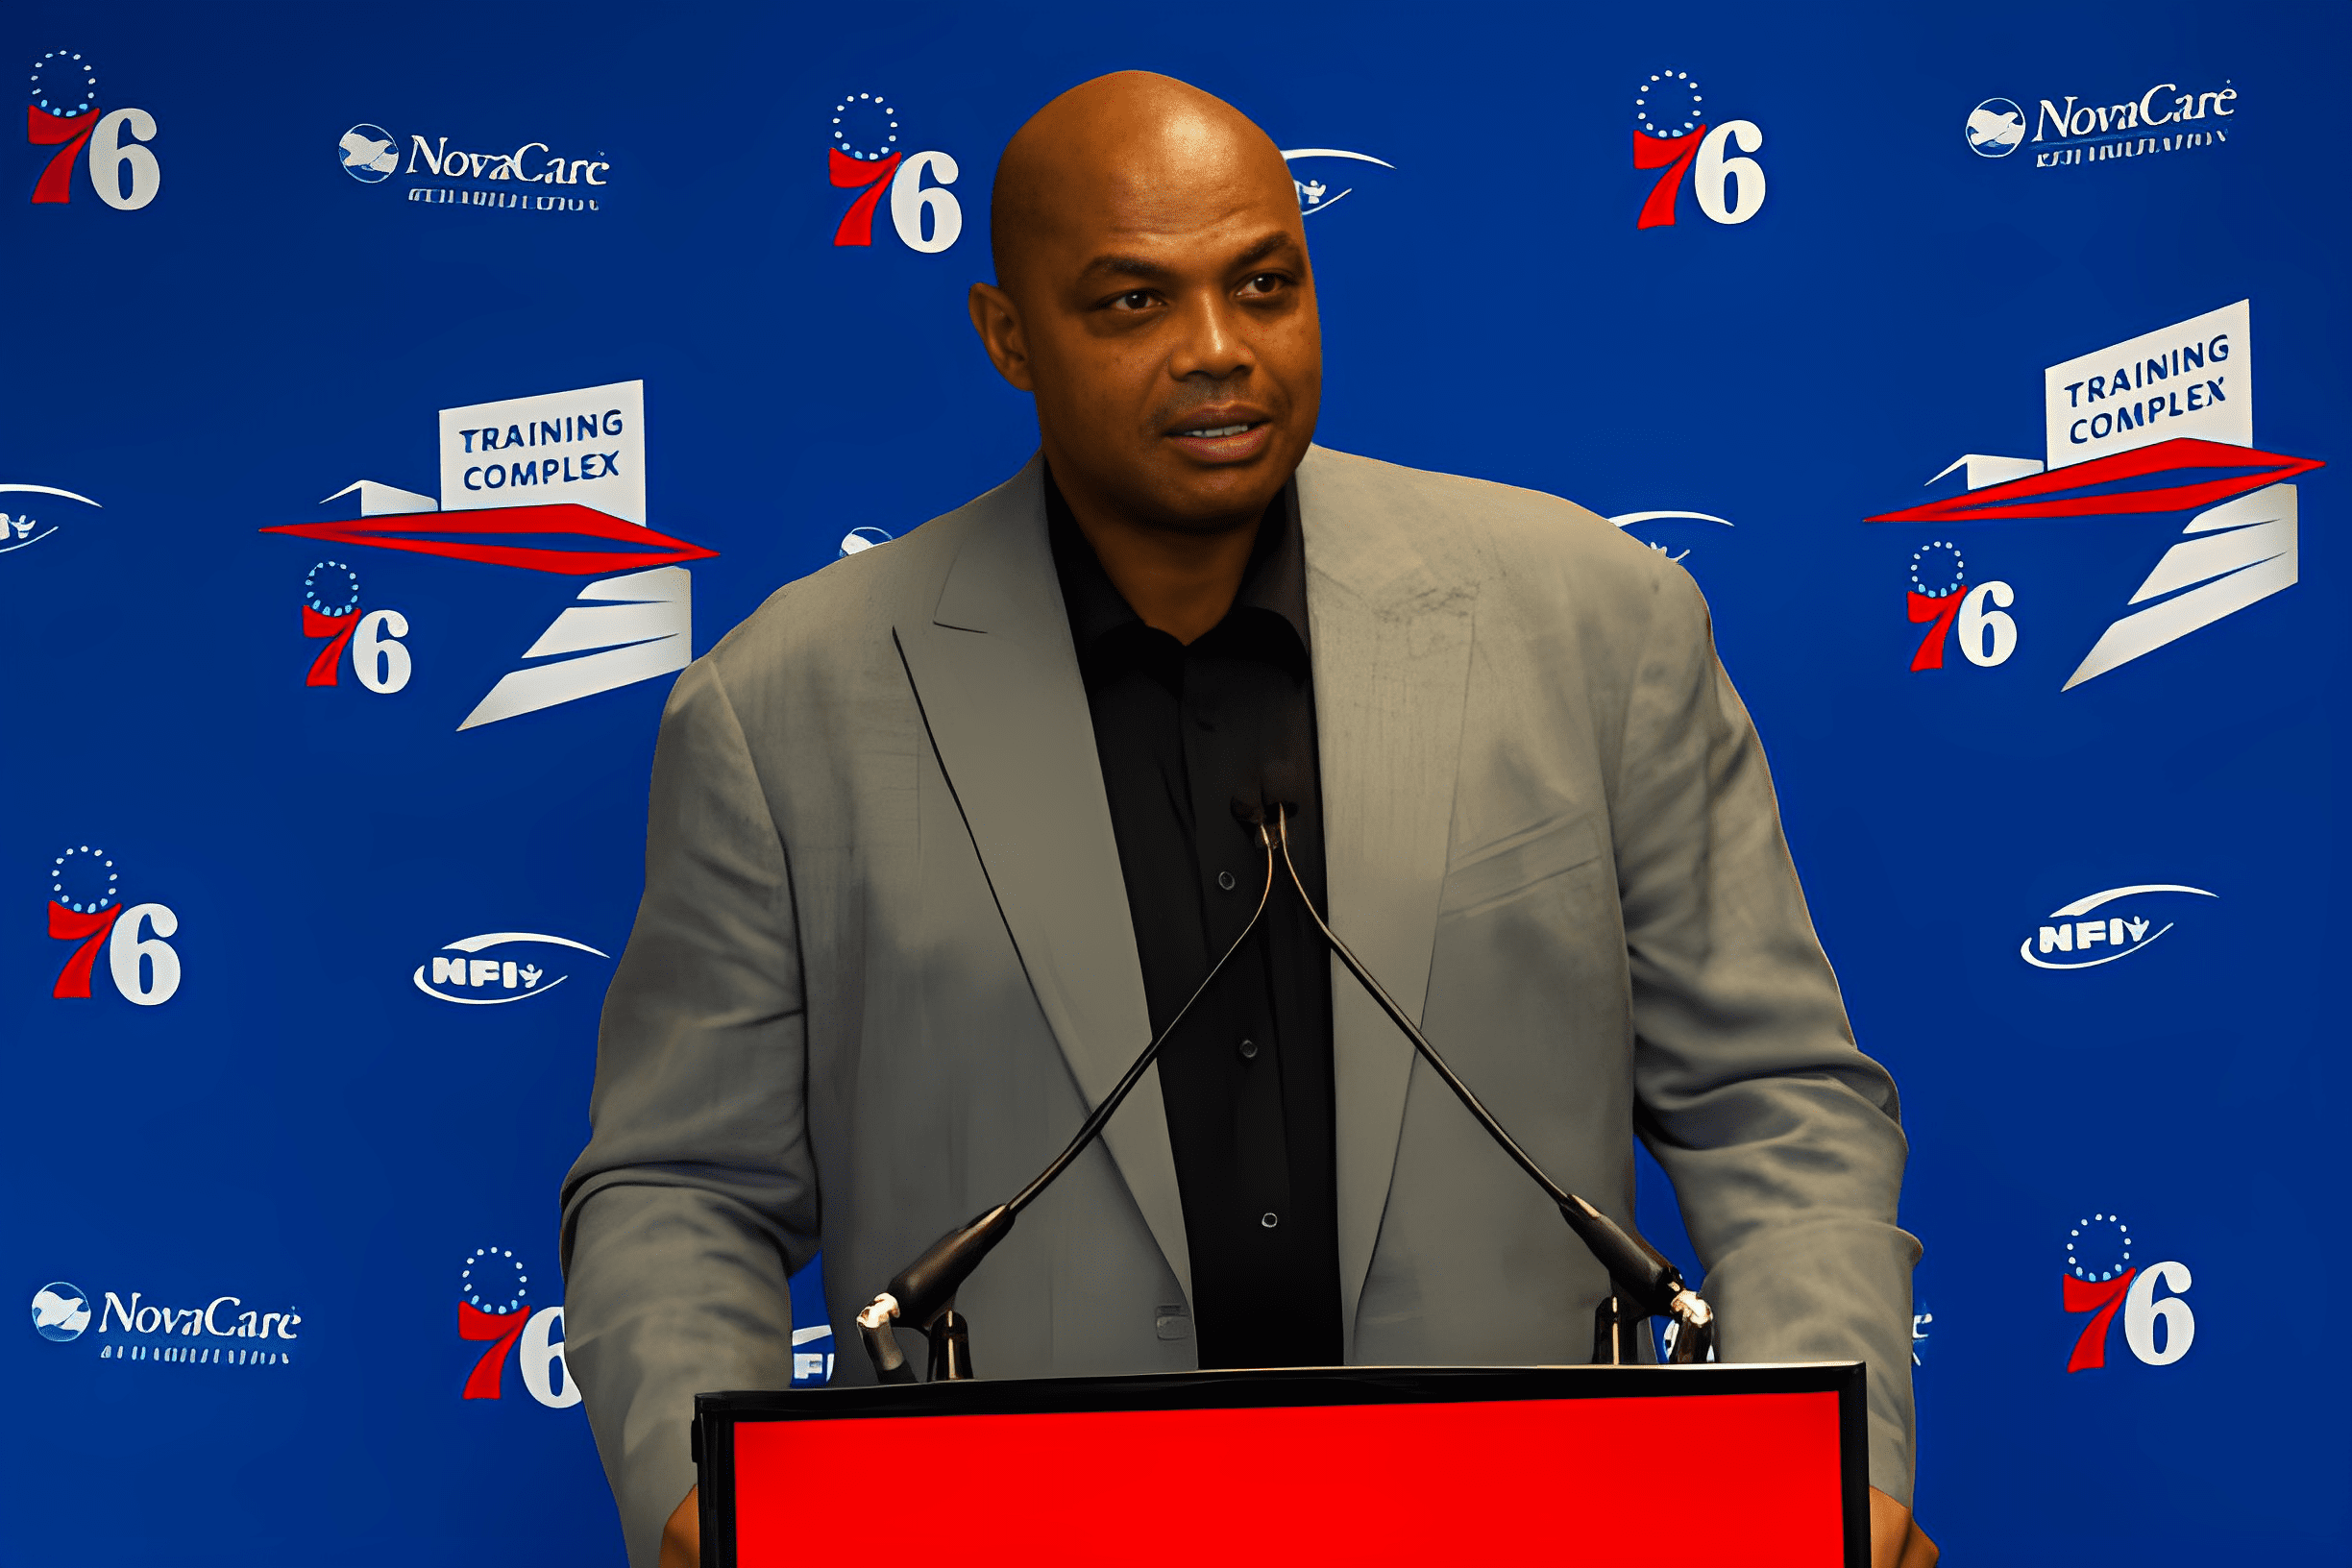 CAMDEN, NJ - SEPTEMBER 13: Charles Barkley speaks at the podium prior to his sculpture being unveiled at the Philadelphia 76ers training facility on September 13, 2019 in Camden, New Jersey. (Photo by Mitchell Leff/Getty Images)